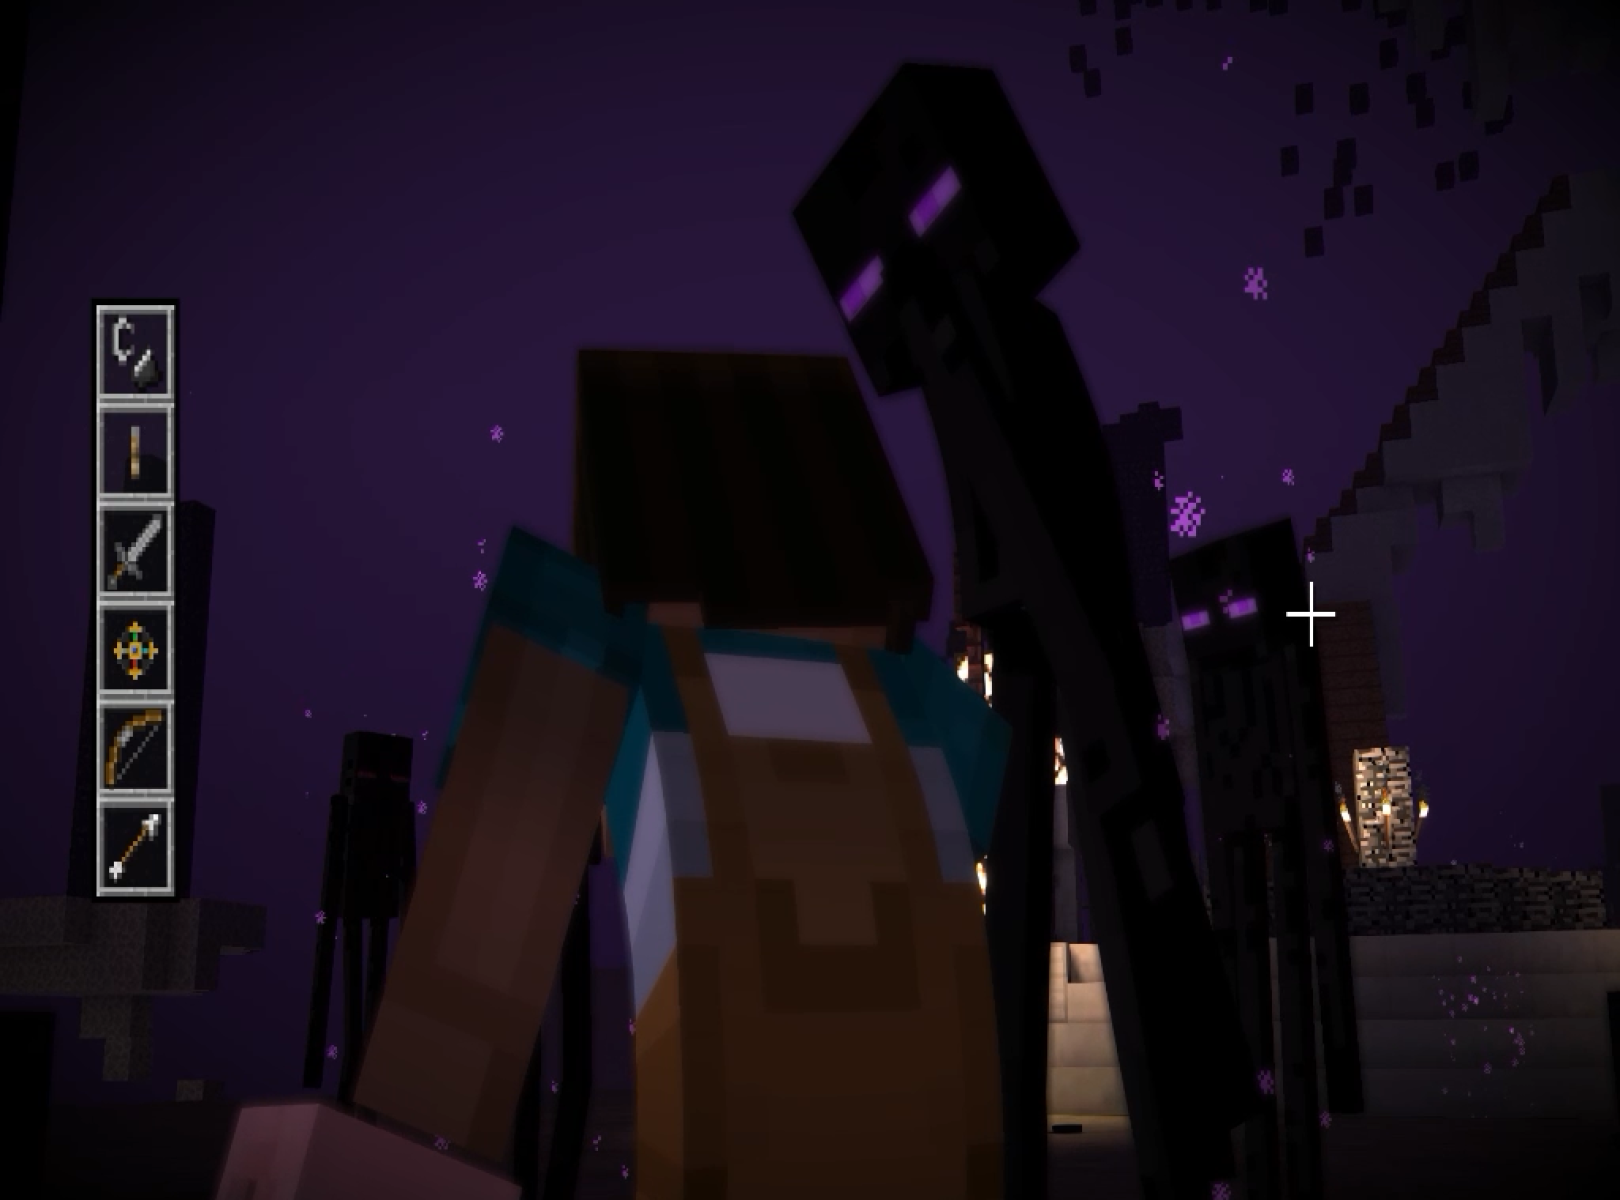 Minecraft: Story Mode Episode One--The Order of the Stone Review - GameSpot